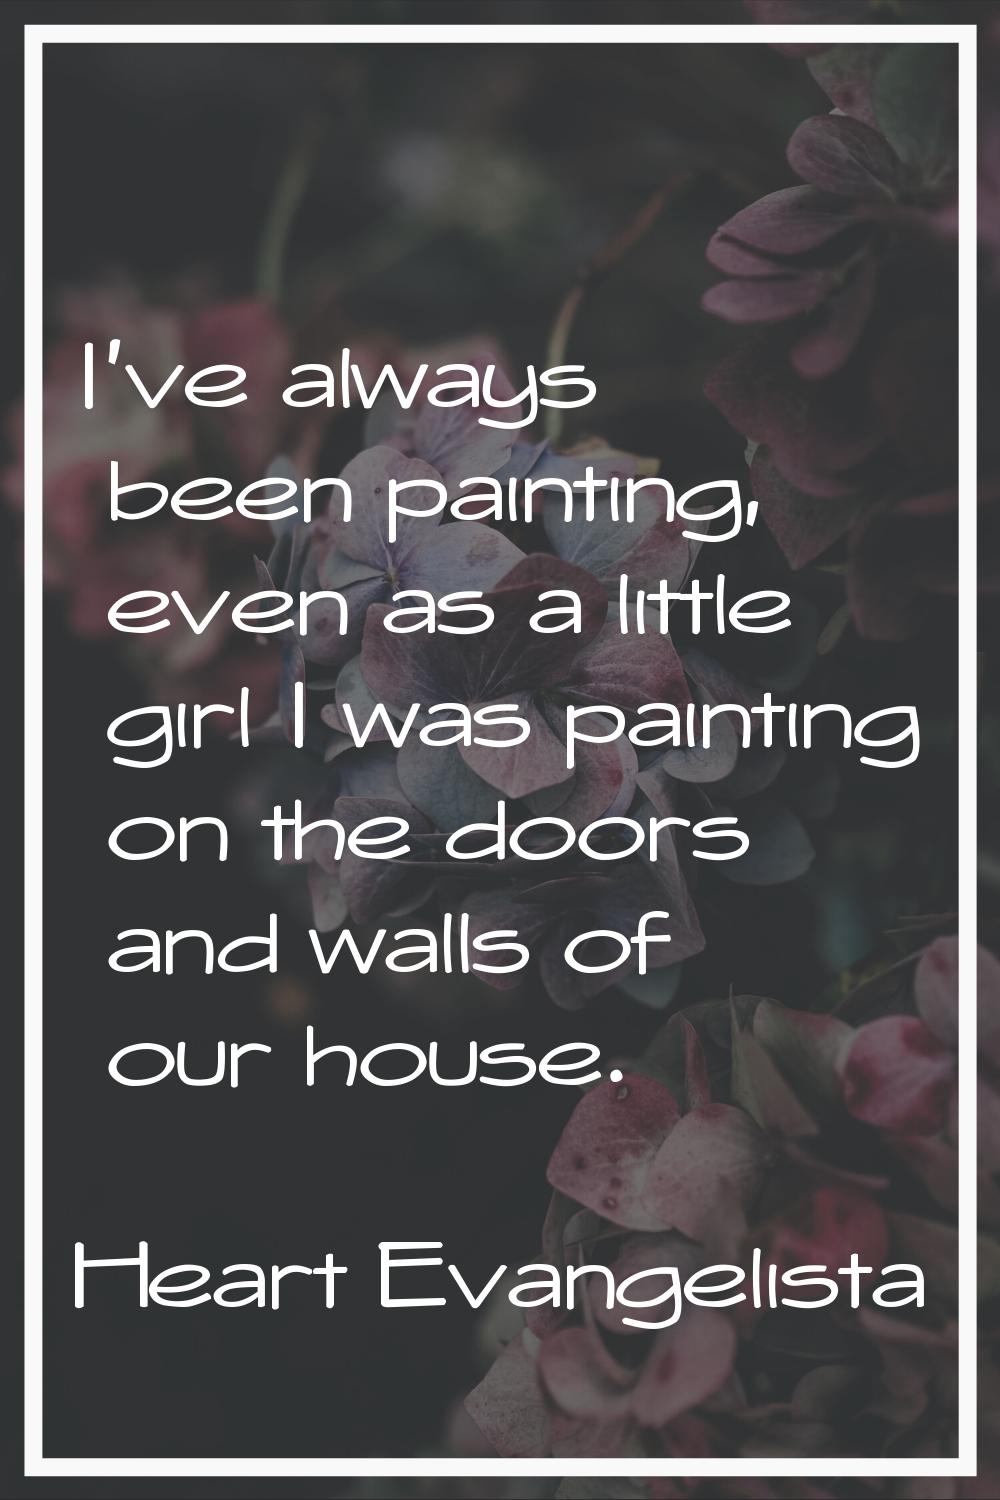 I've always been painting, even as a little girl I was painting on the doors and walls of our house